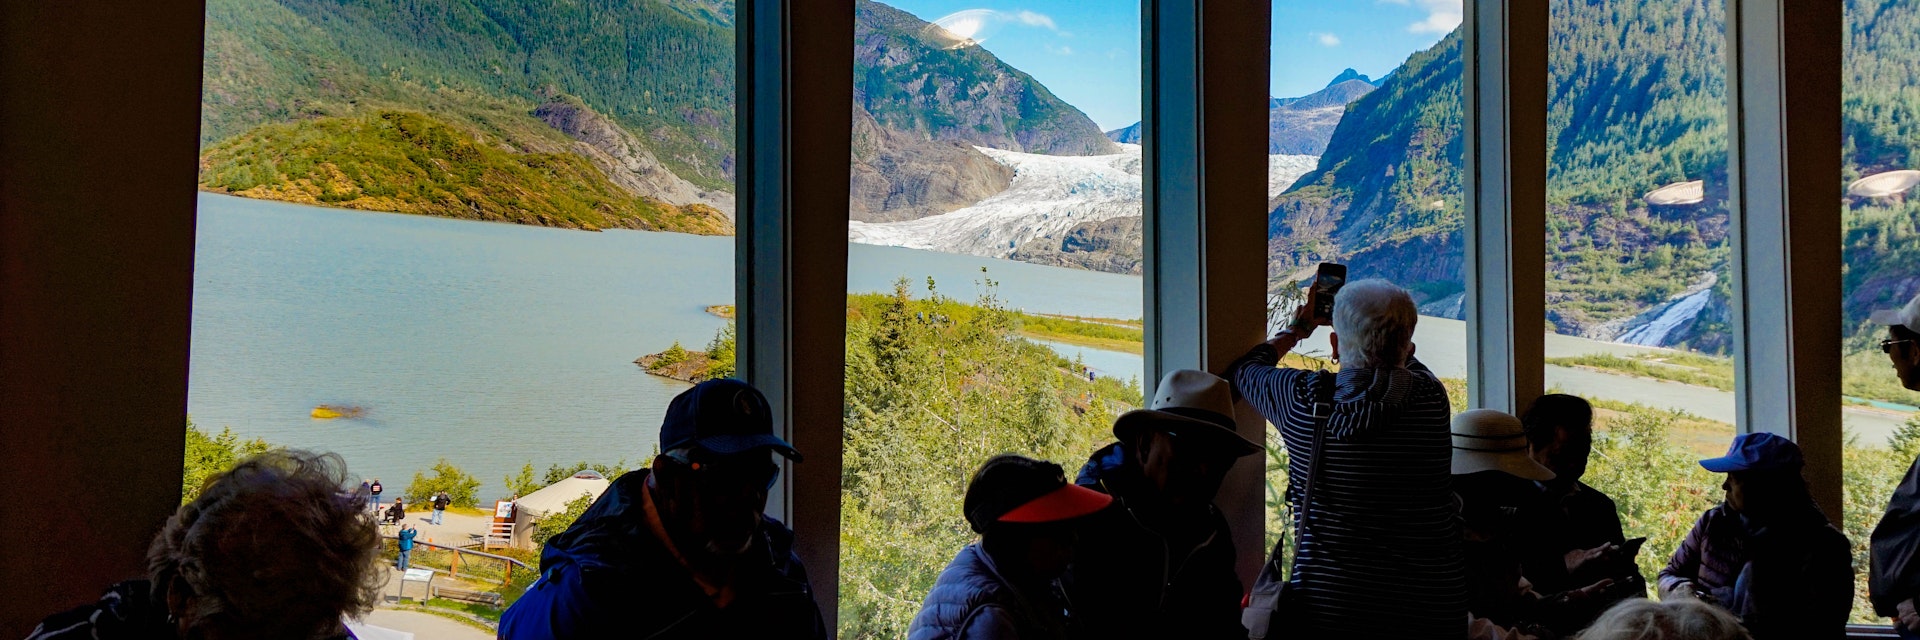 View of the glacier from the inside of the Mendenhall Glacier Visitor Center.